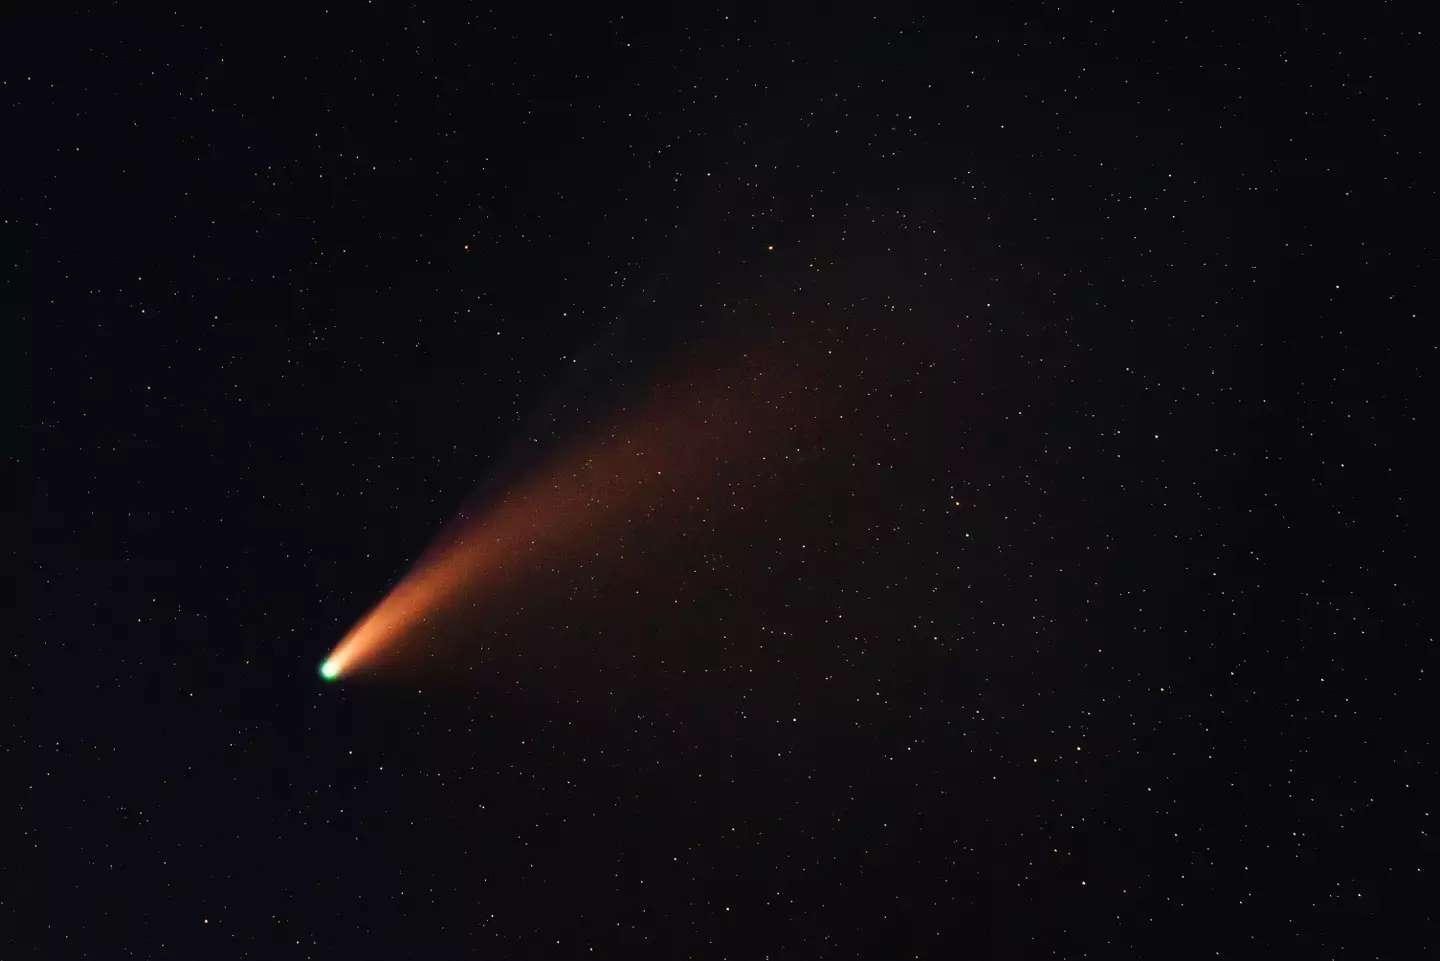 A comet will pass Earth for the first time in 50,000 years.